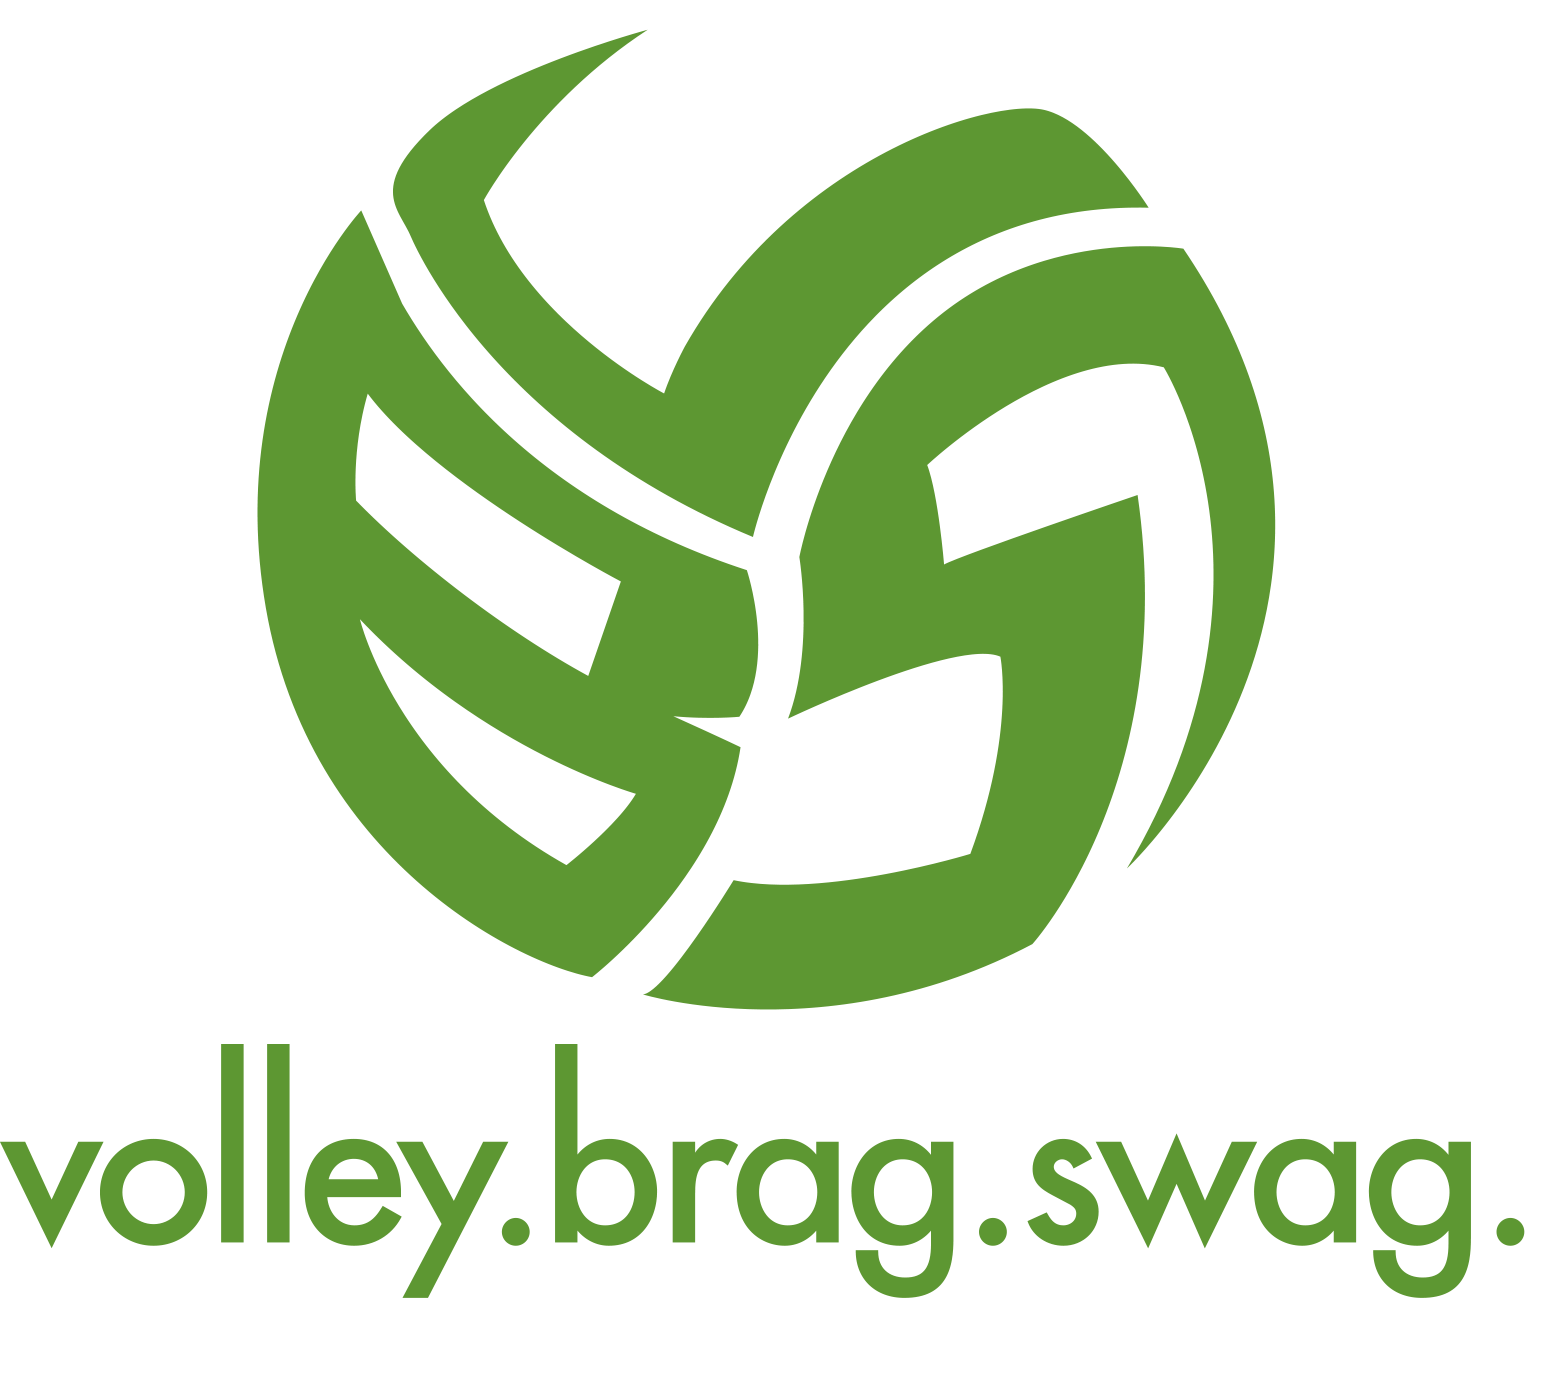 Volleyball T-Shirt Ideas By Volleybragswag Is Beast Inspired Attire created in 2013 by April Chapple. The Volleybragswag ball logo design.